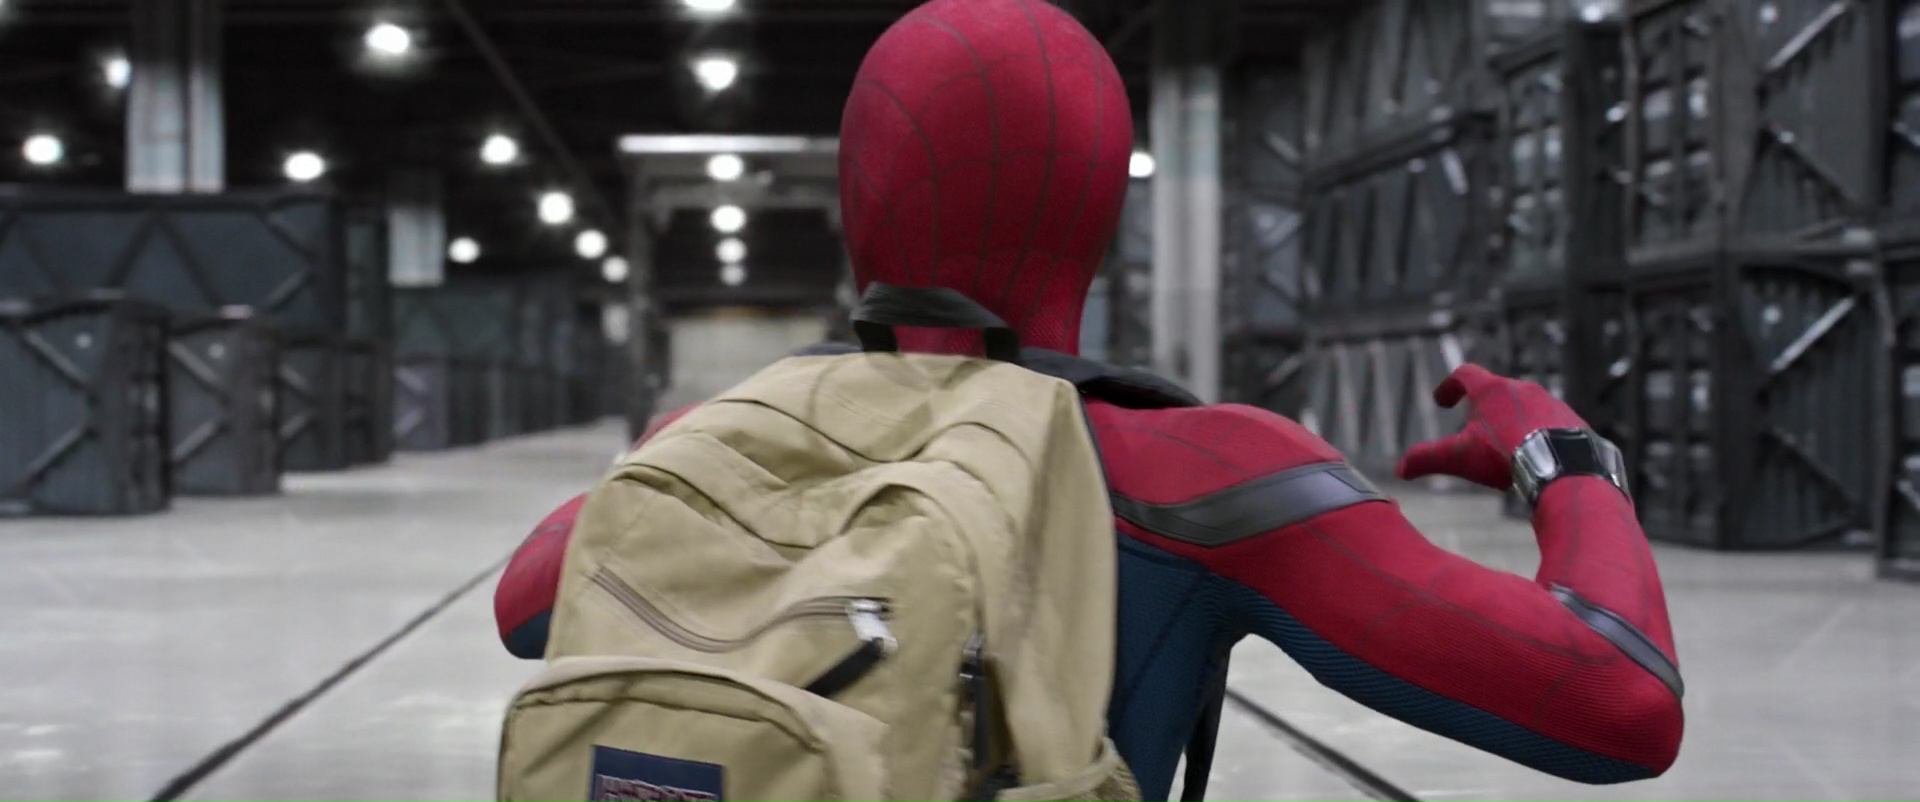 JanSport Backpack Worn by Tom Holland in Spider-Man: Homecoming (2017) Movie1920 x 802